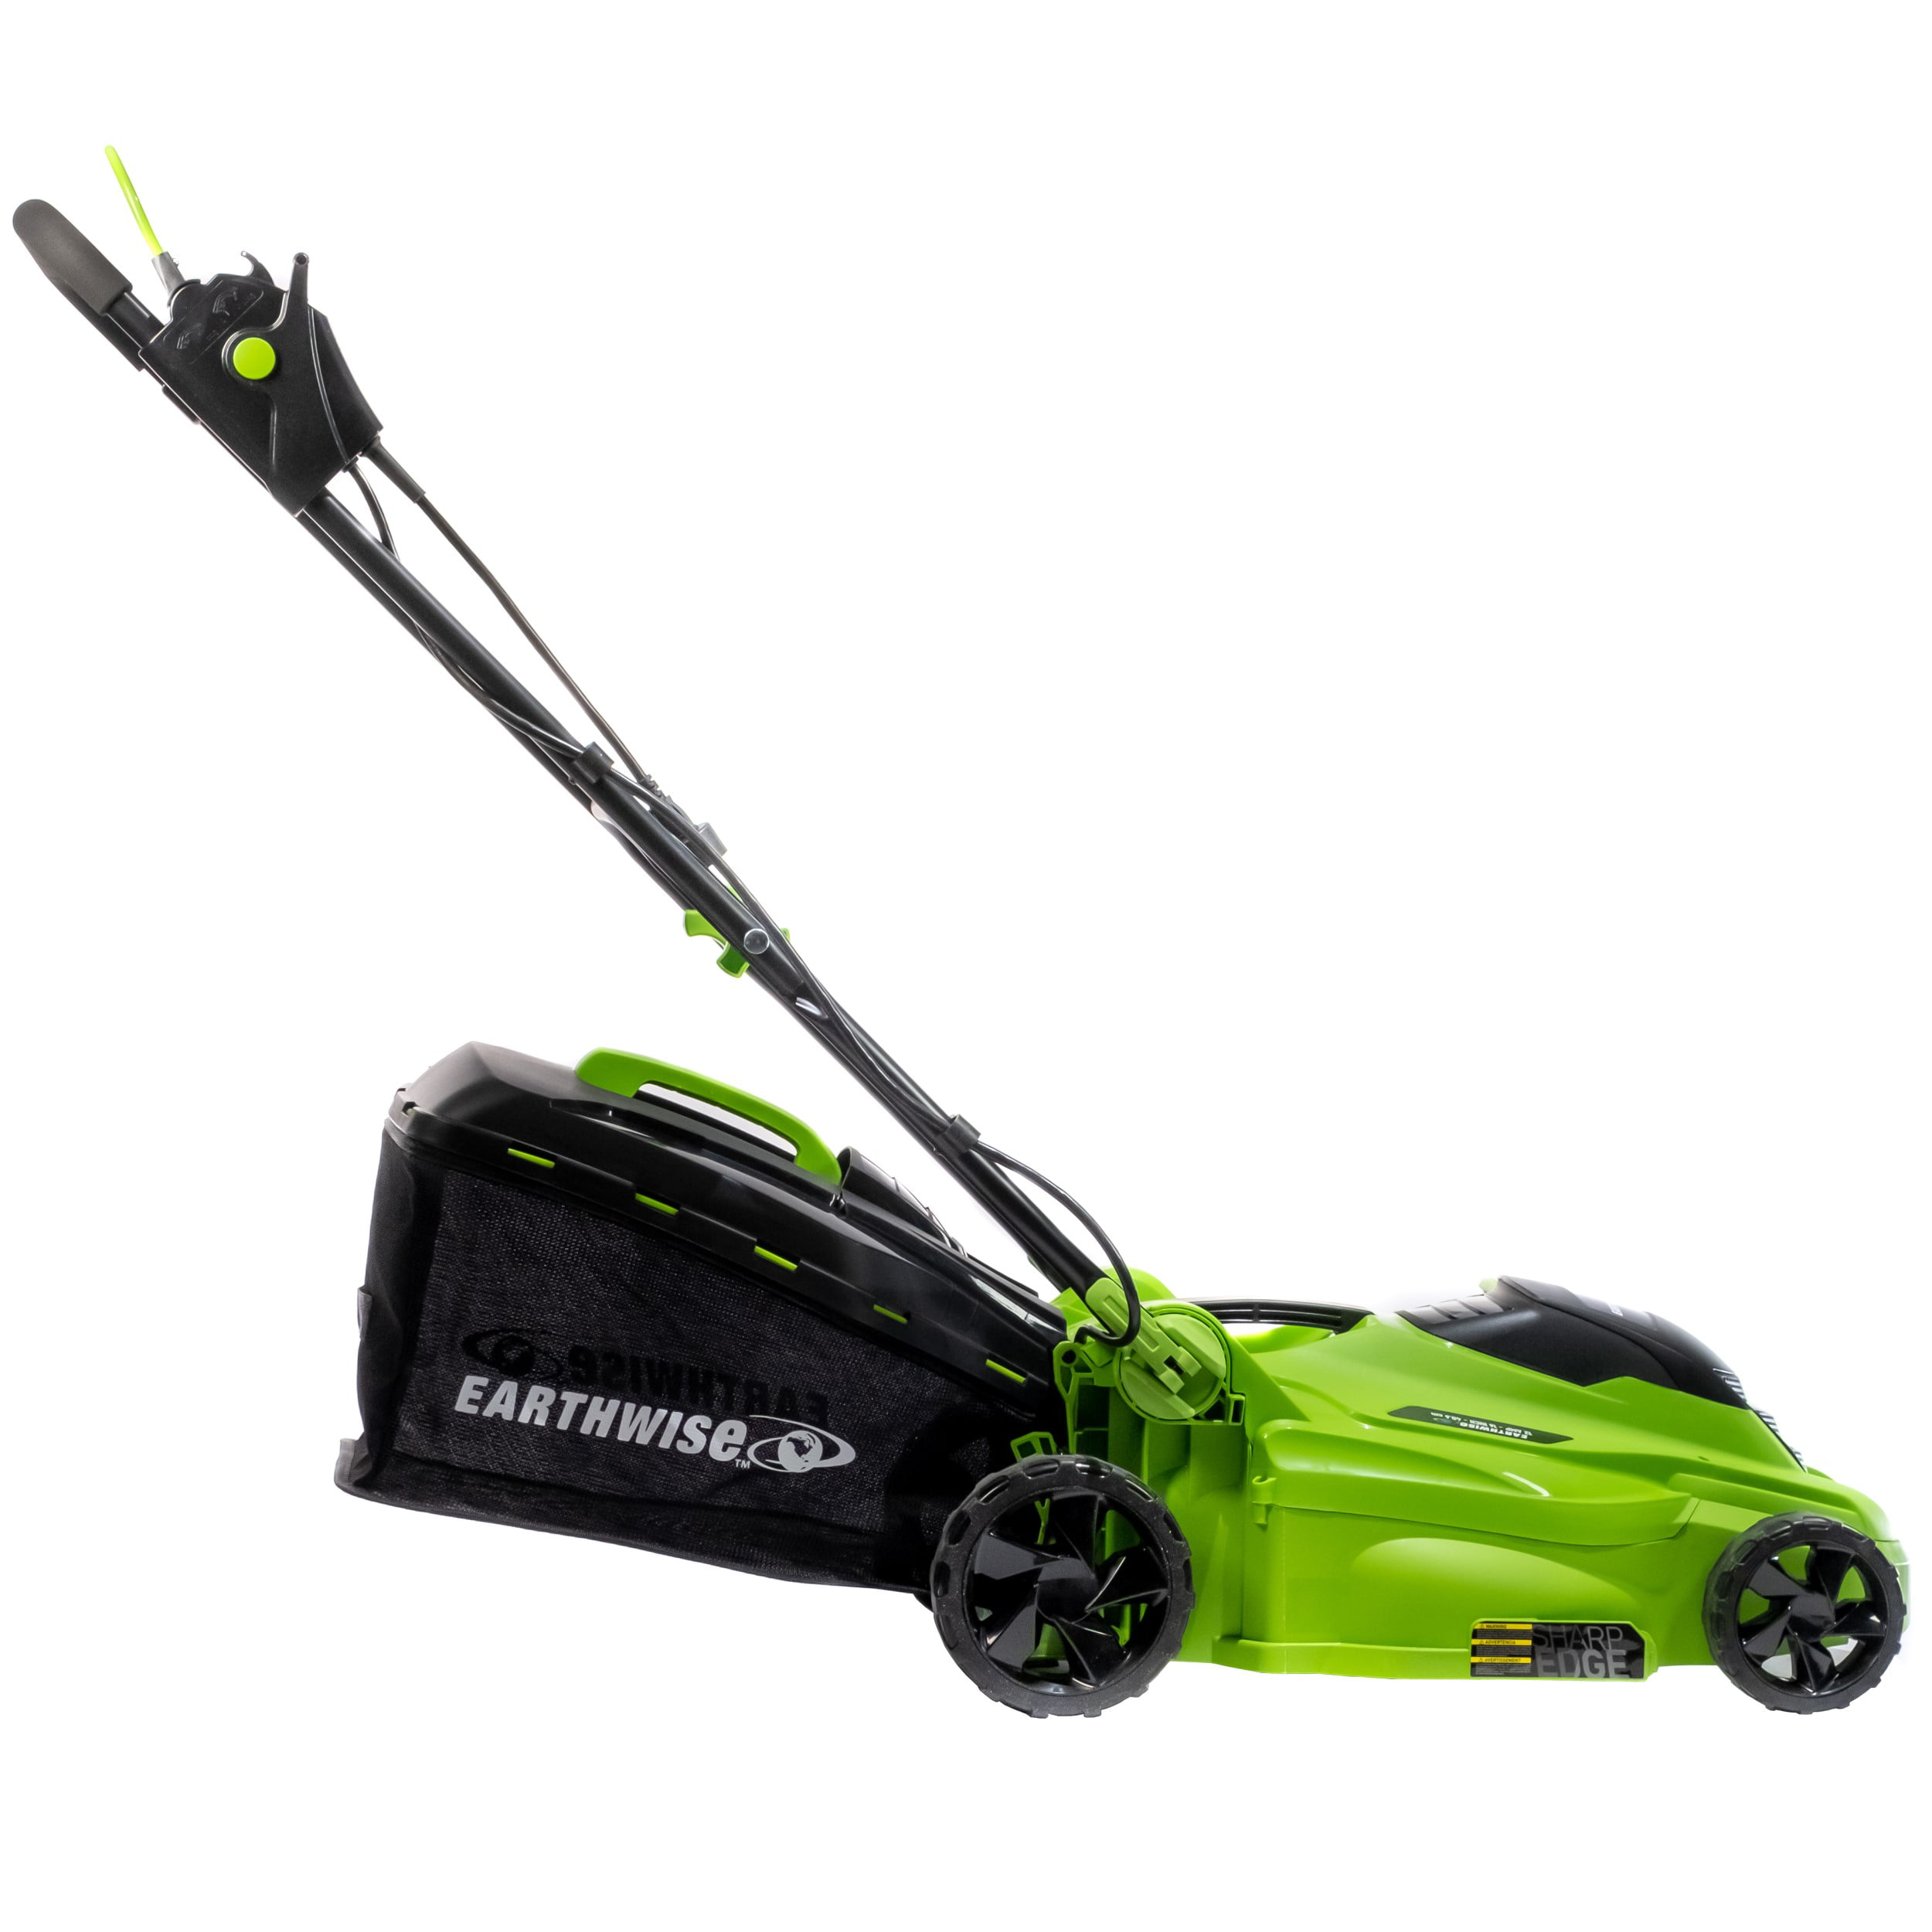 Earthwise 50616 16-Inch 11-Amp Corded Electric Lawn Mower